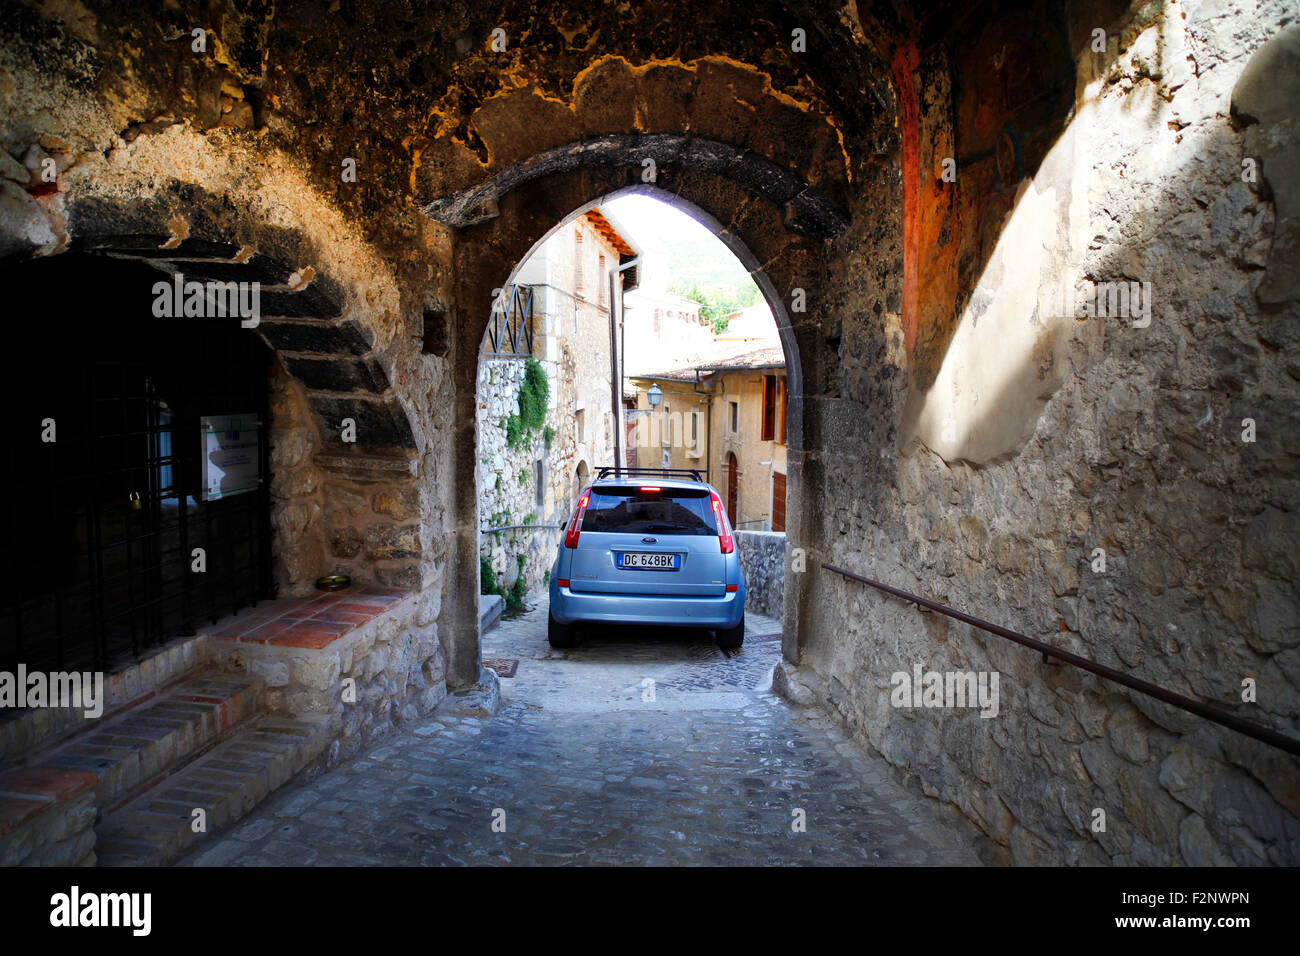 A car negotiates the tight streets in the medieval village of Fontecchio in Italy. Stock Photo